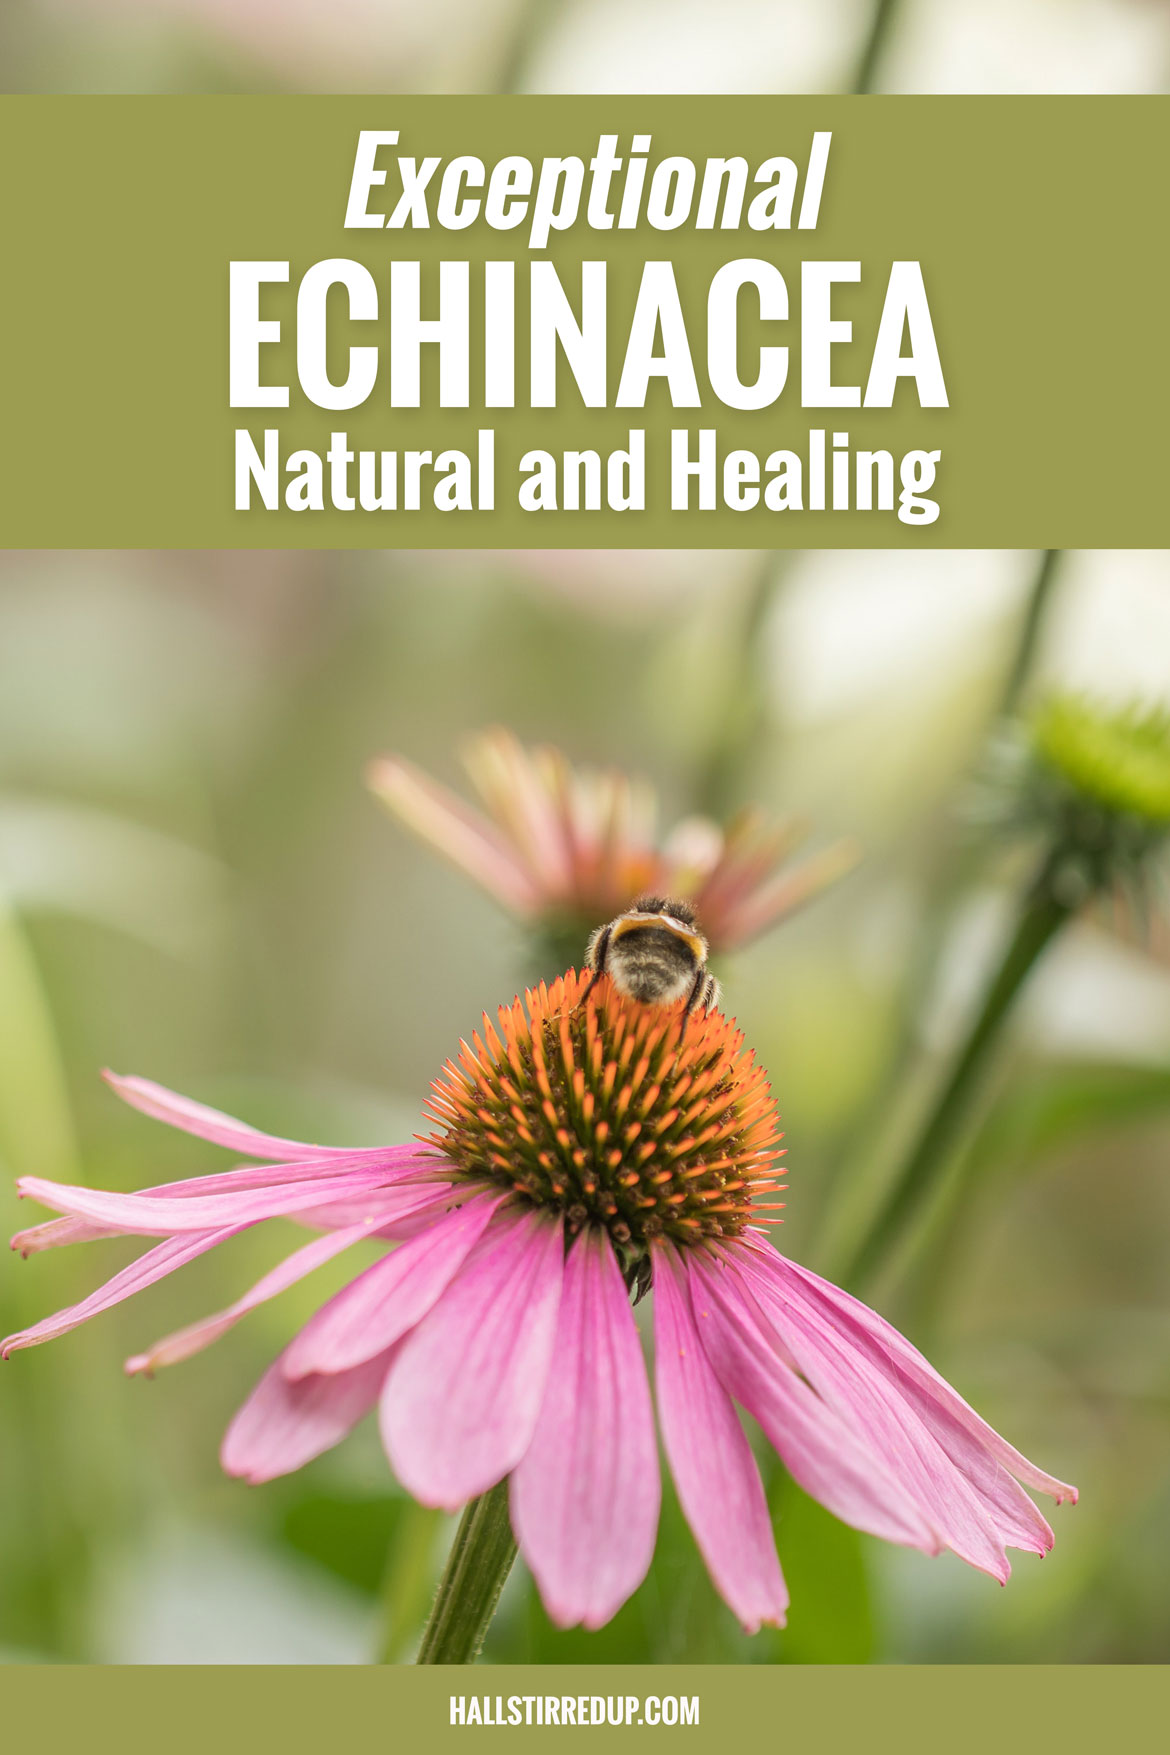 Exceptional Echinacea Natural and Healing